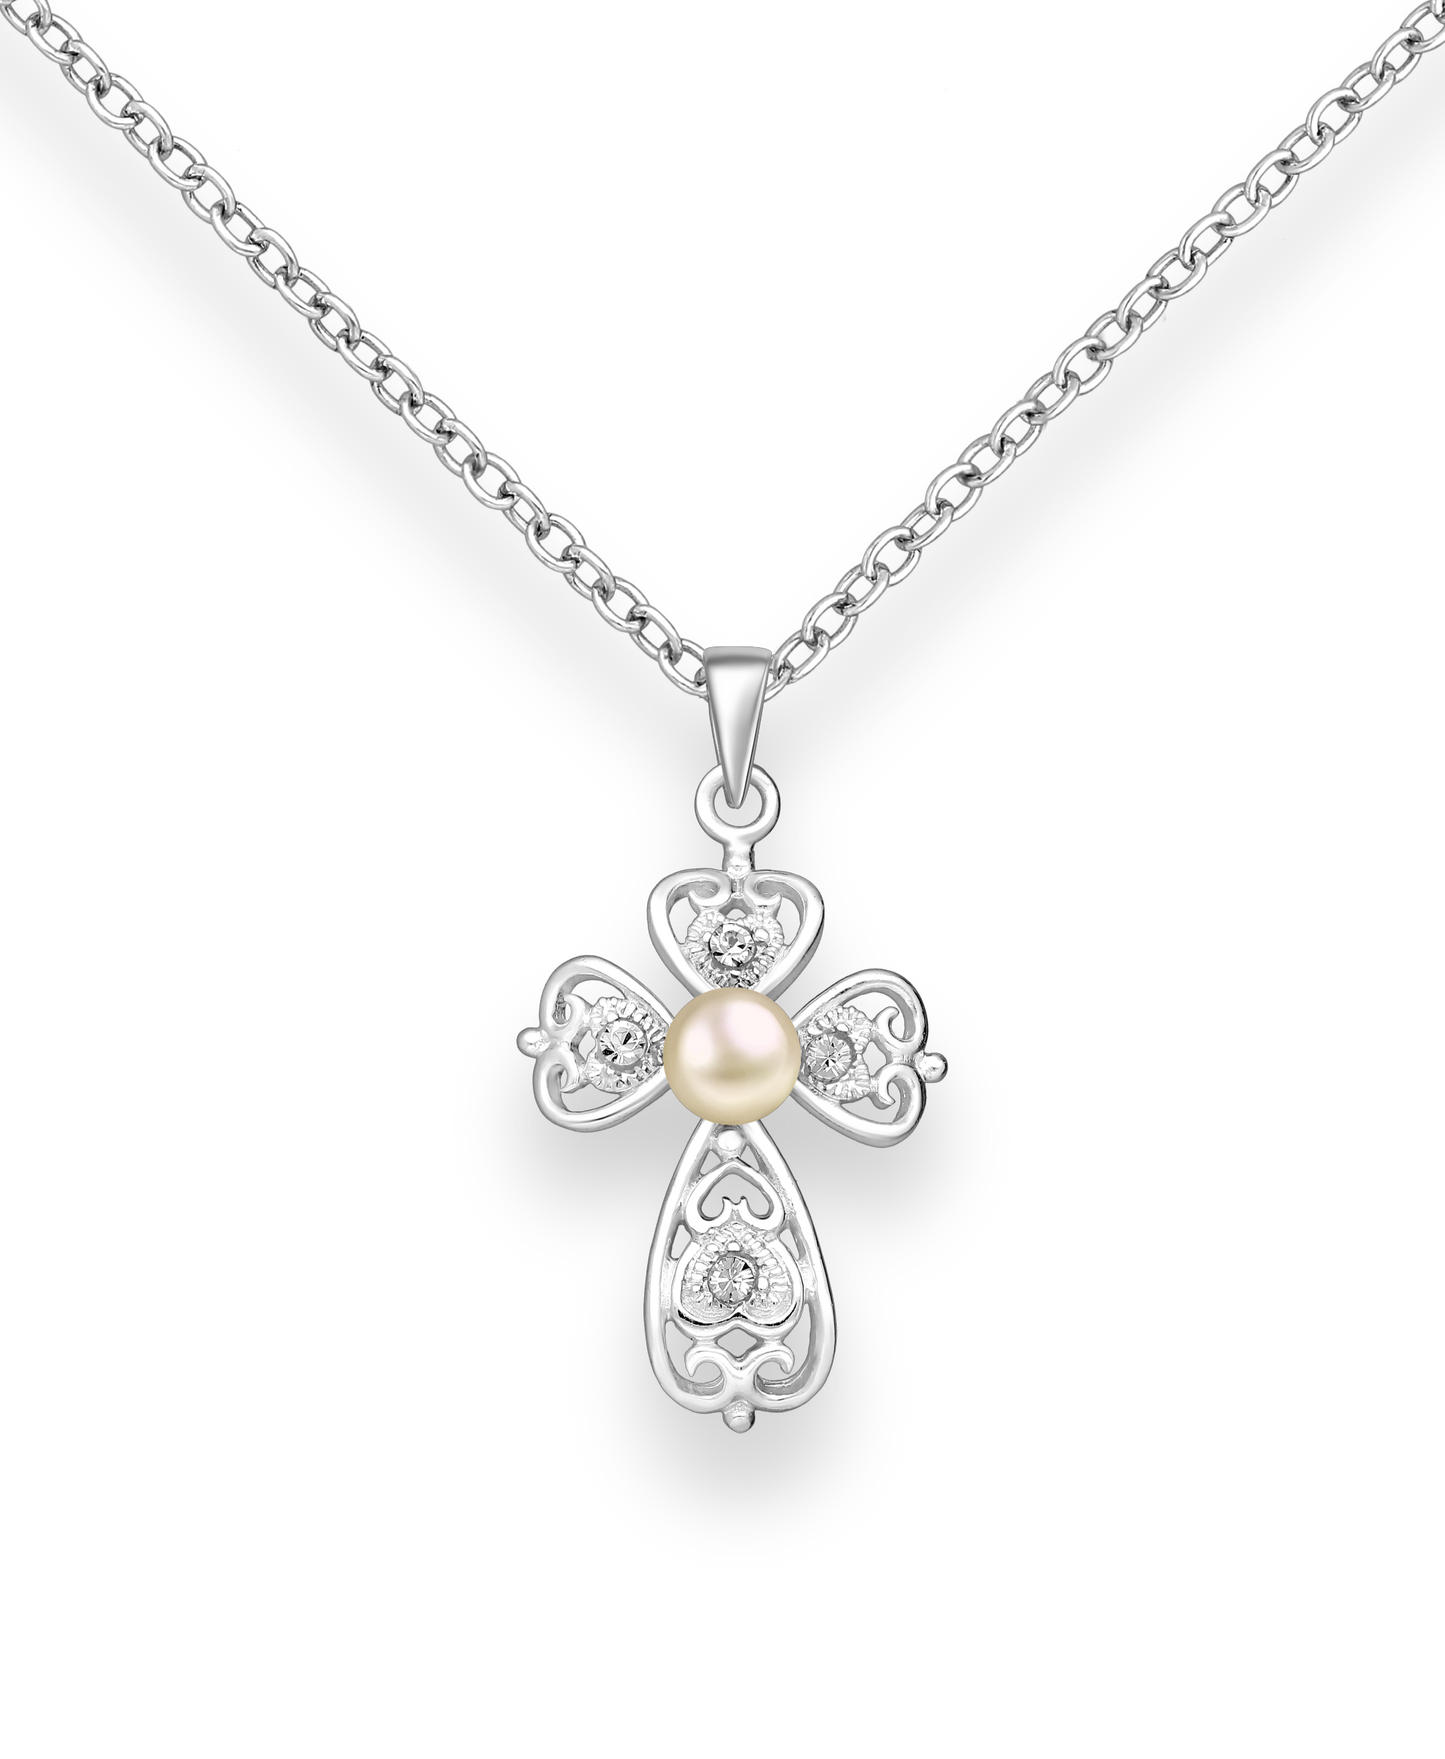 Sterling Silver Swirl Cross Pendant with a Peach Freshwater Pearl and Crystal